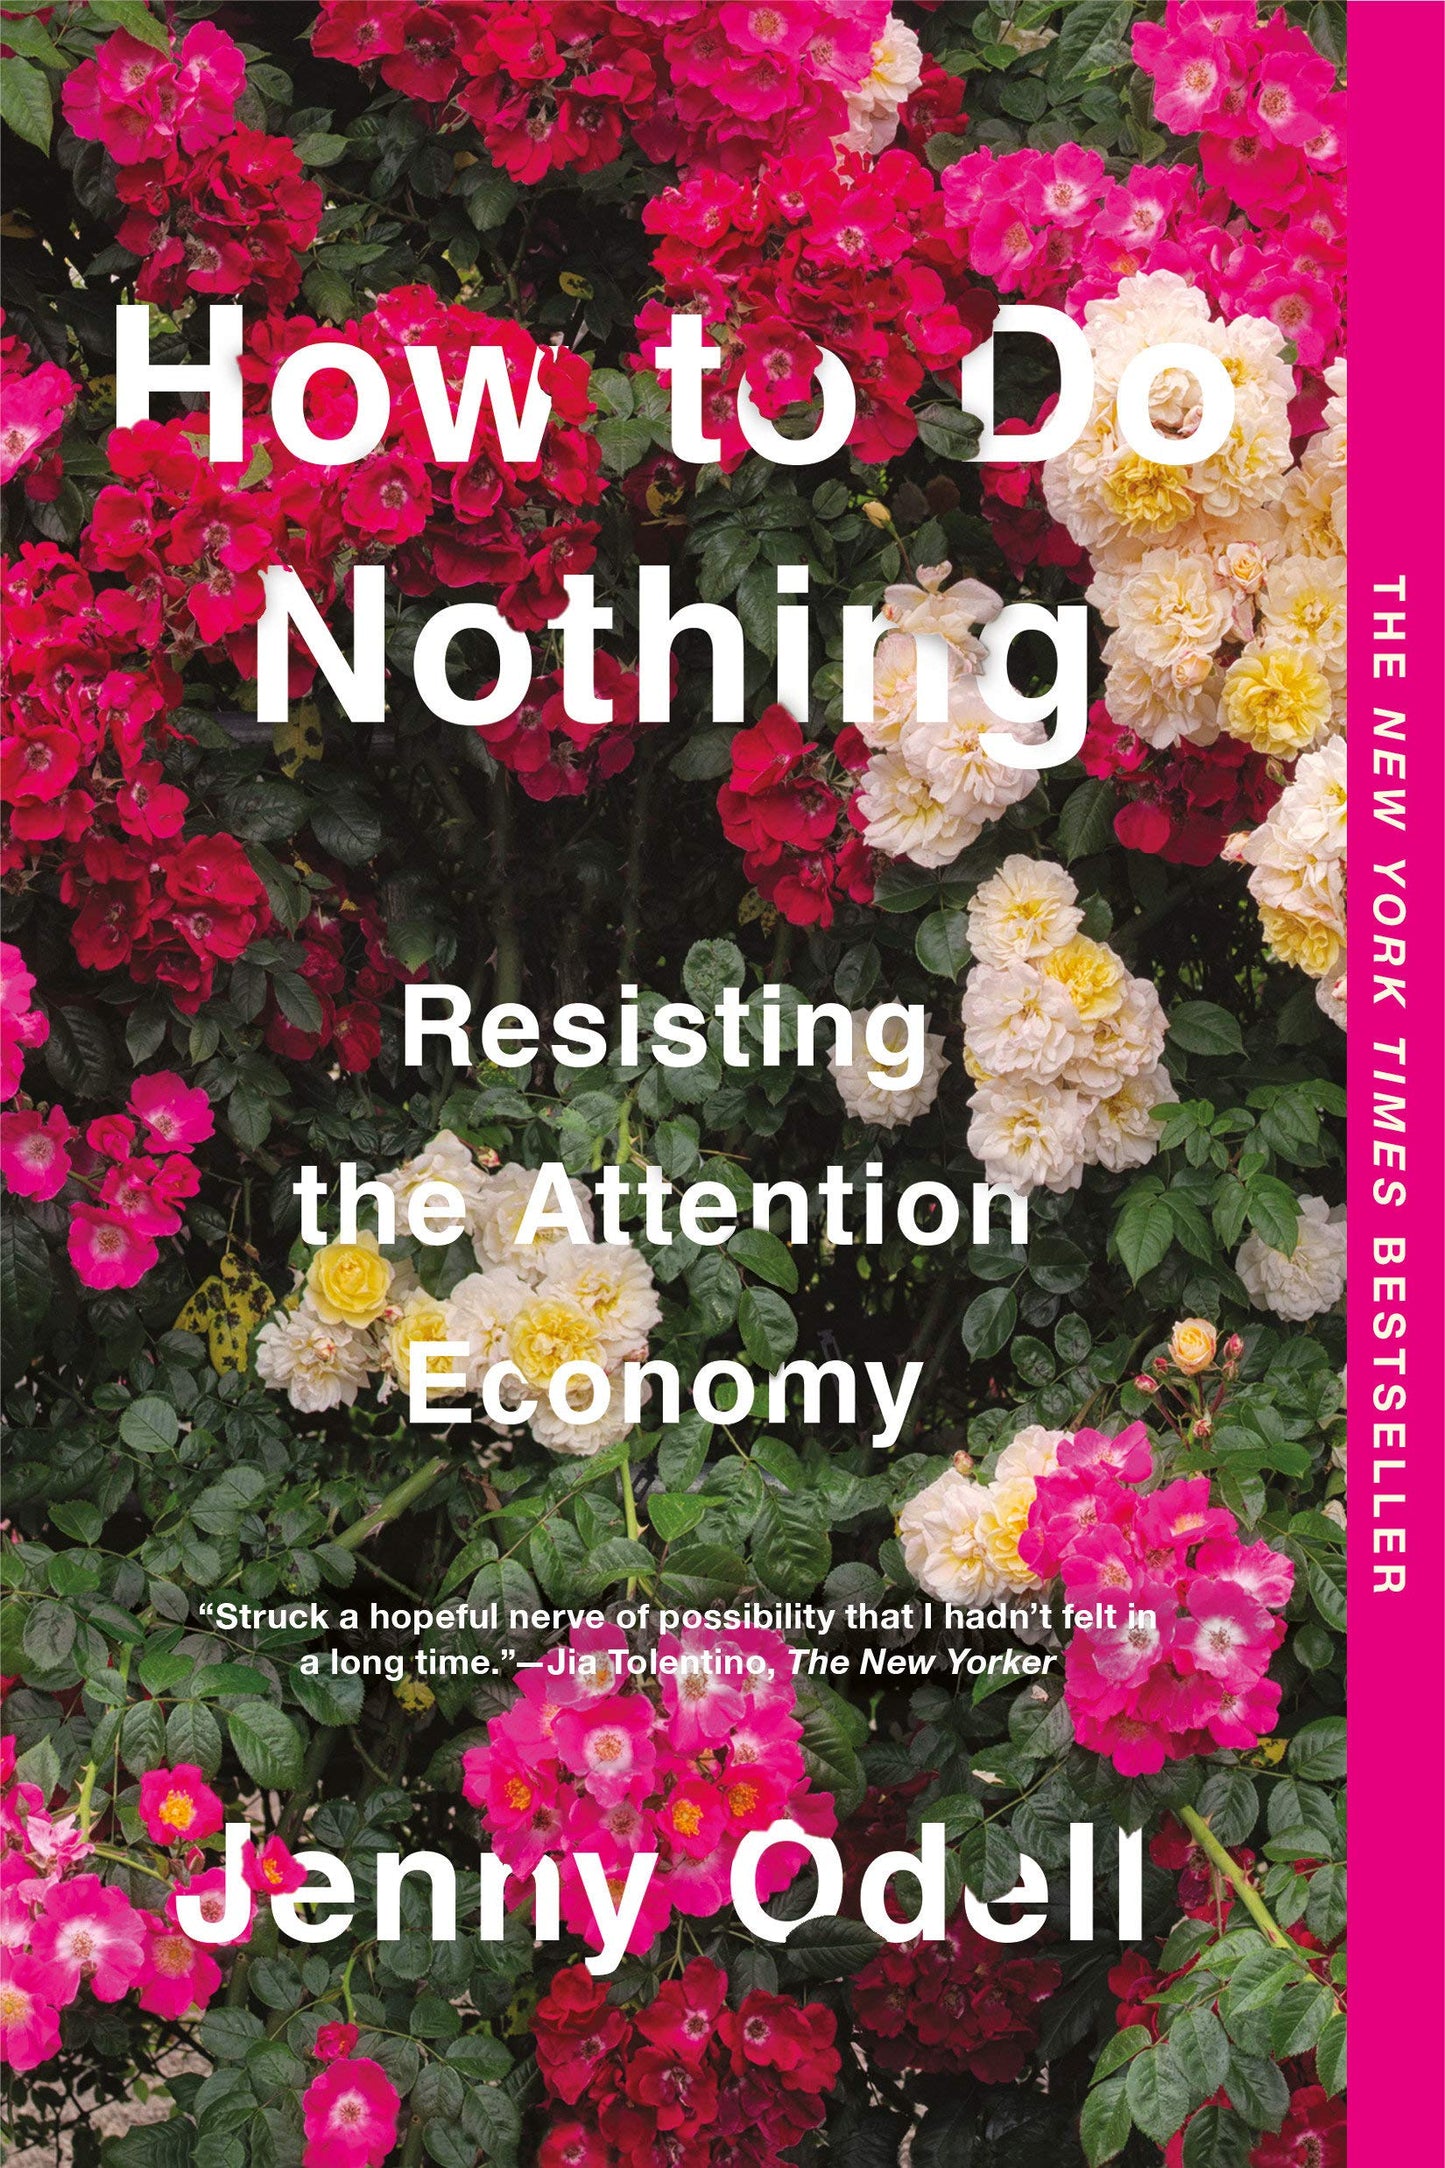 How to do Nothing: Resisting the Attention Economy, by Jenny Odell